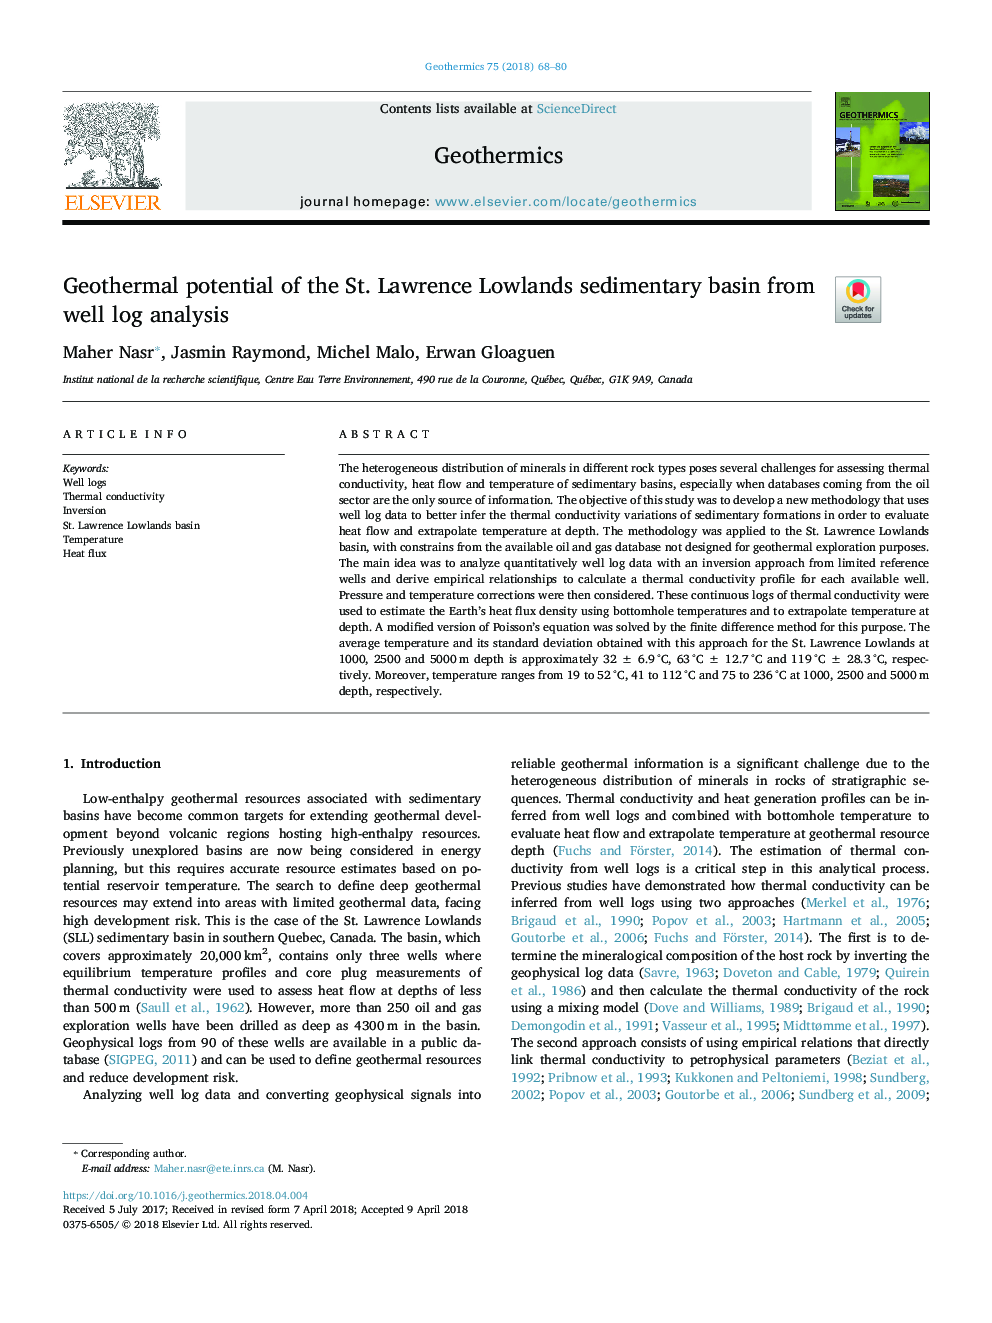 Geothermal potential of the St. Lawrence Lowlands sedimentary basin from well log analysis